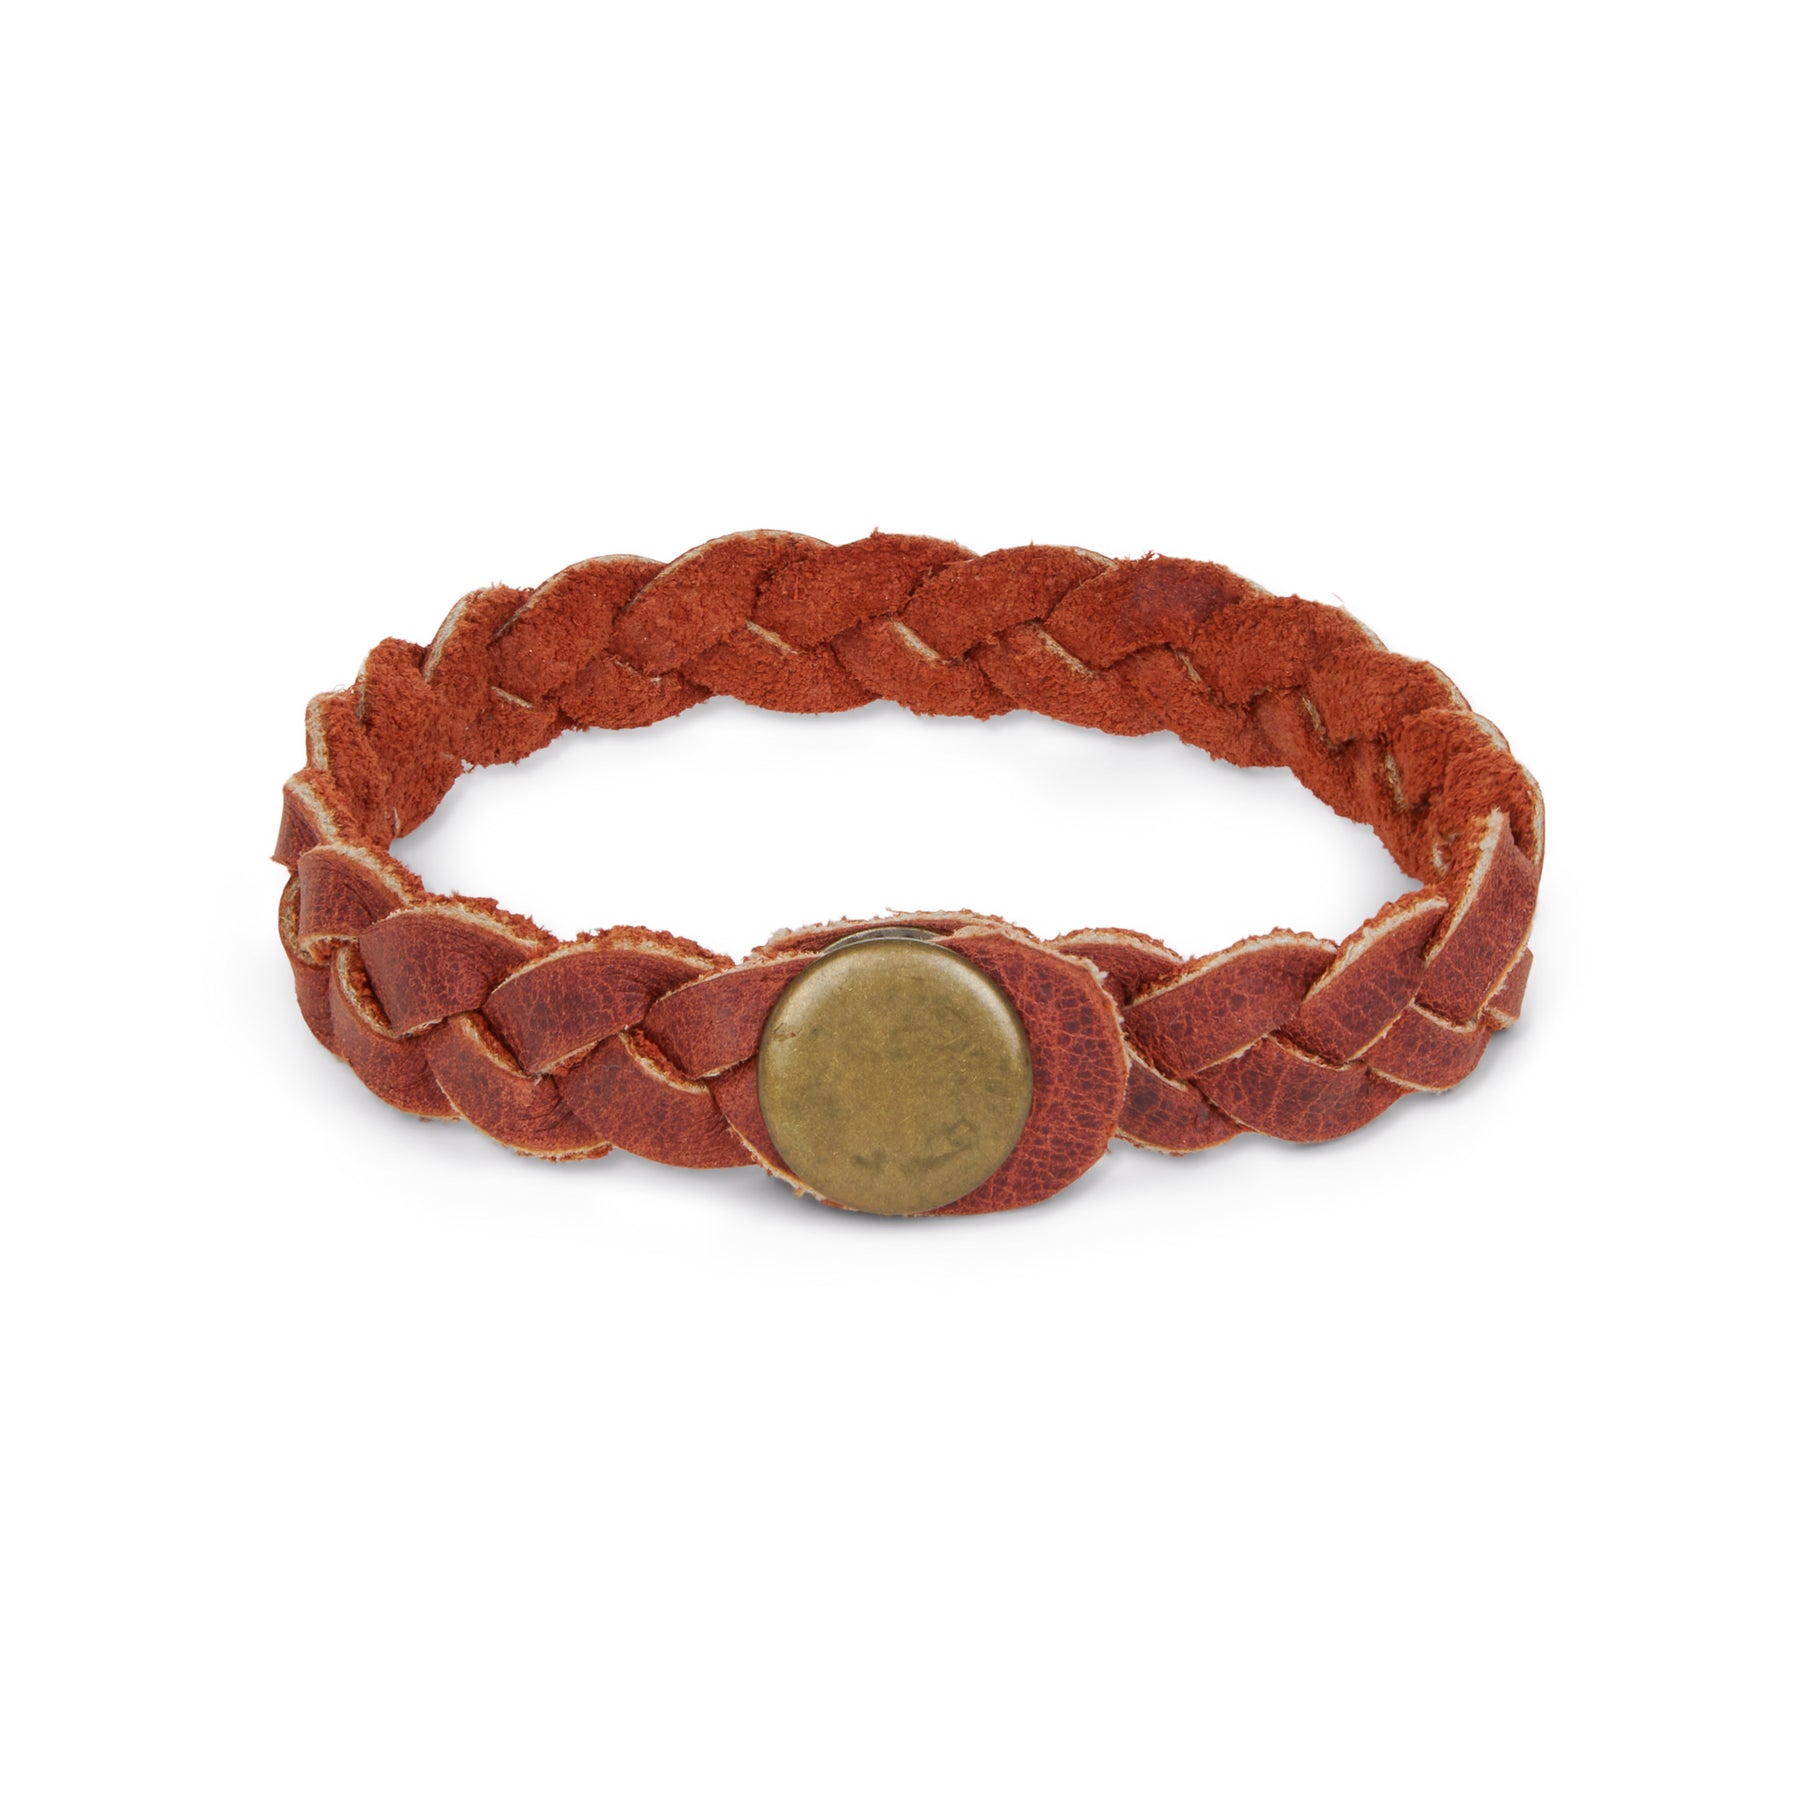 Gnome & Bow Smith Braided Leather Bracelet - Get the Goods